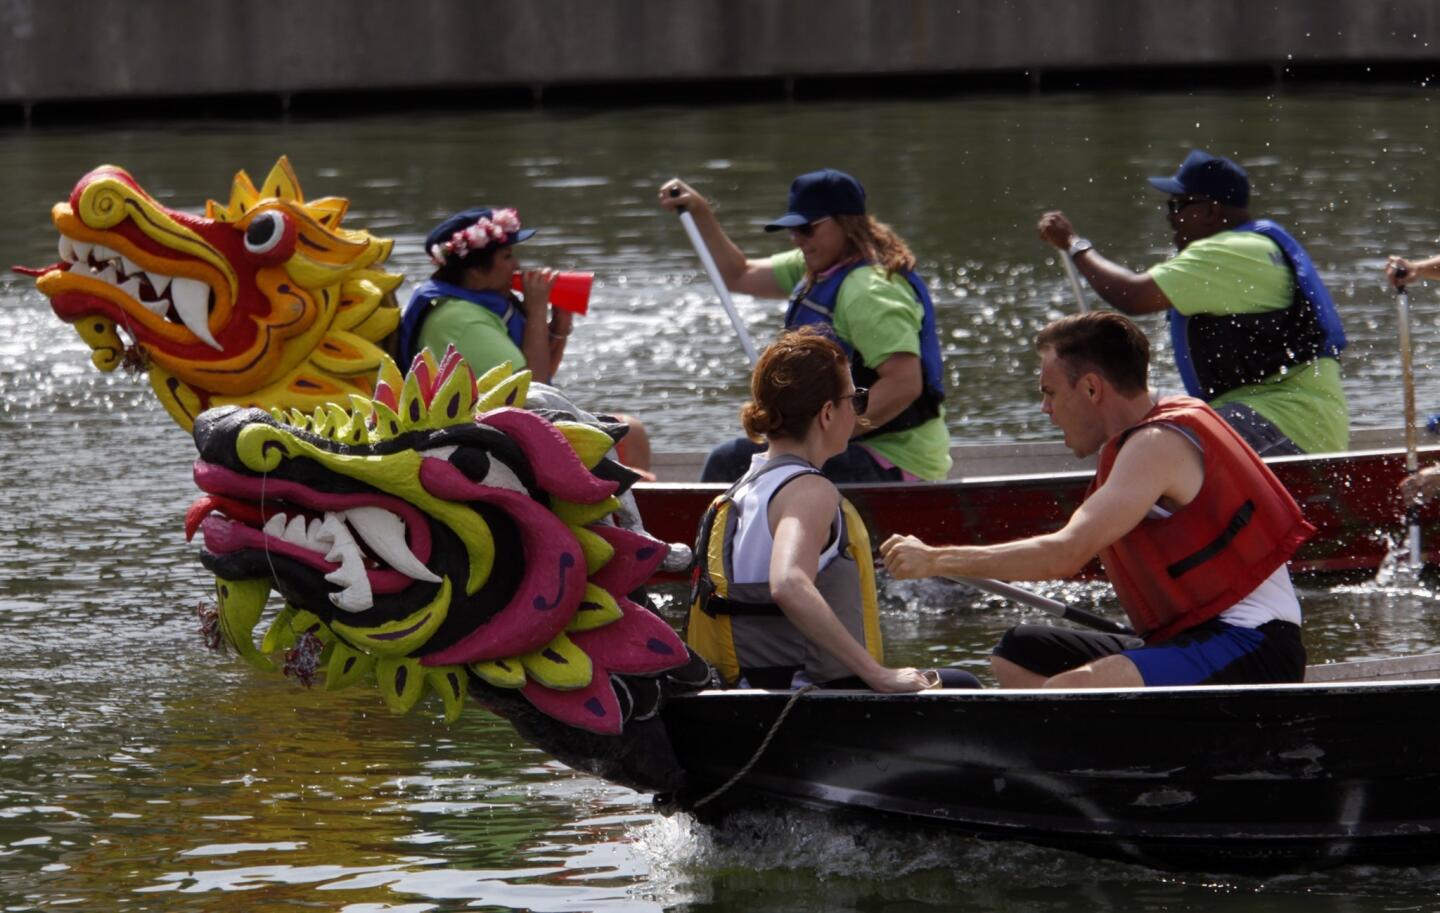 Teams compete in the Dragon Boat Race at Saturday's festival in Echo Park. Heather Repenning and Sam Siegel of "Team Garcetti," foreground, won their race against "Team Rec and Parks."